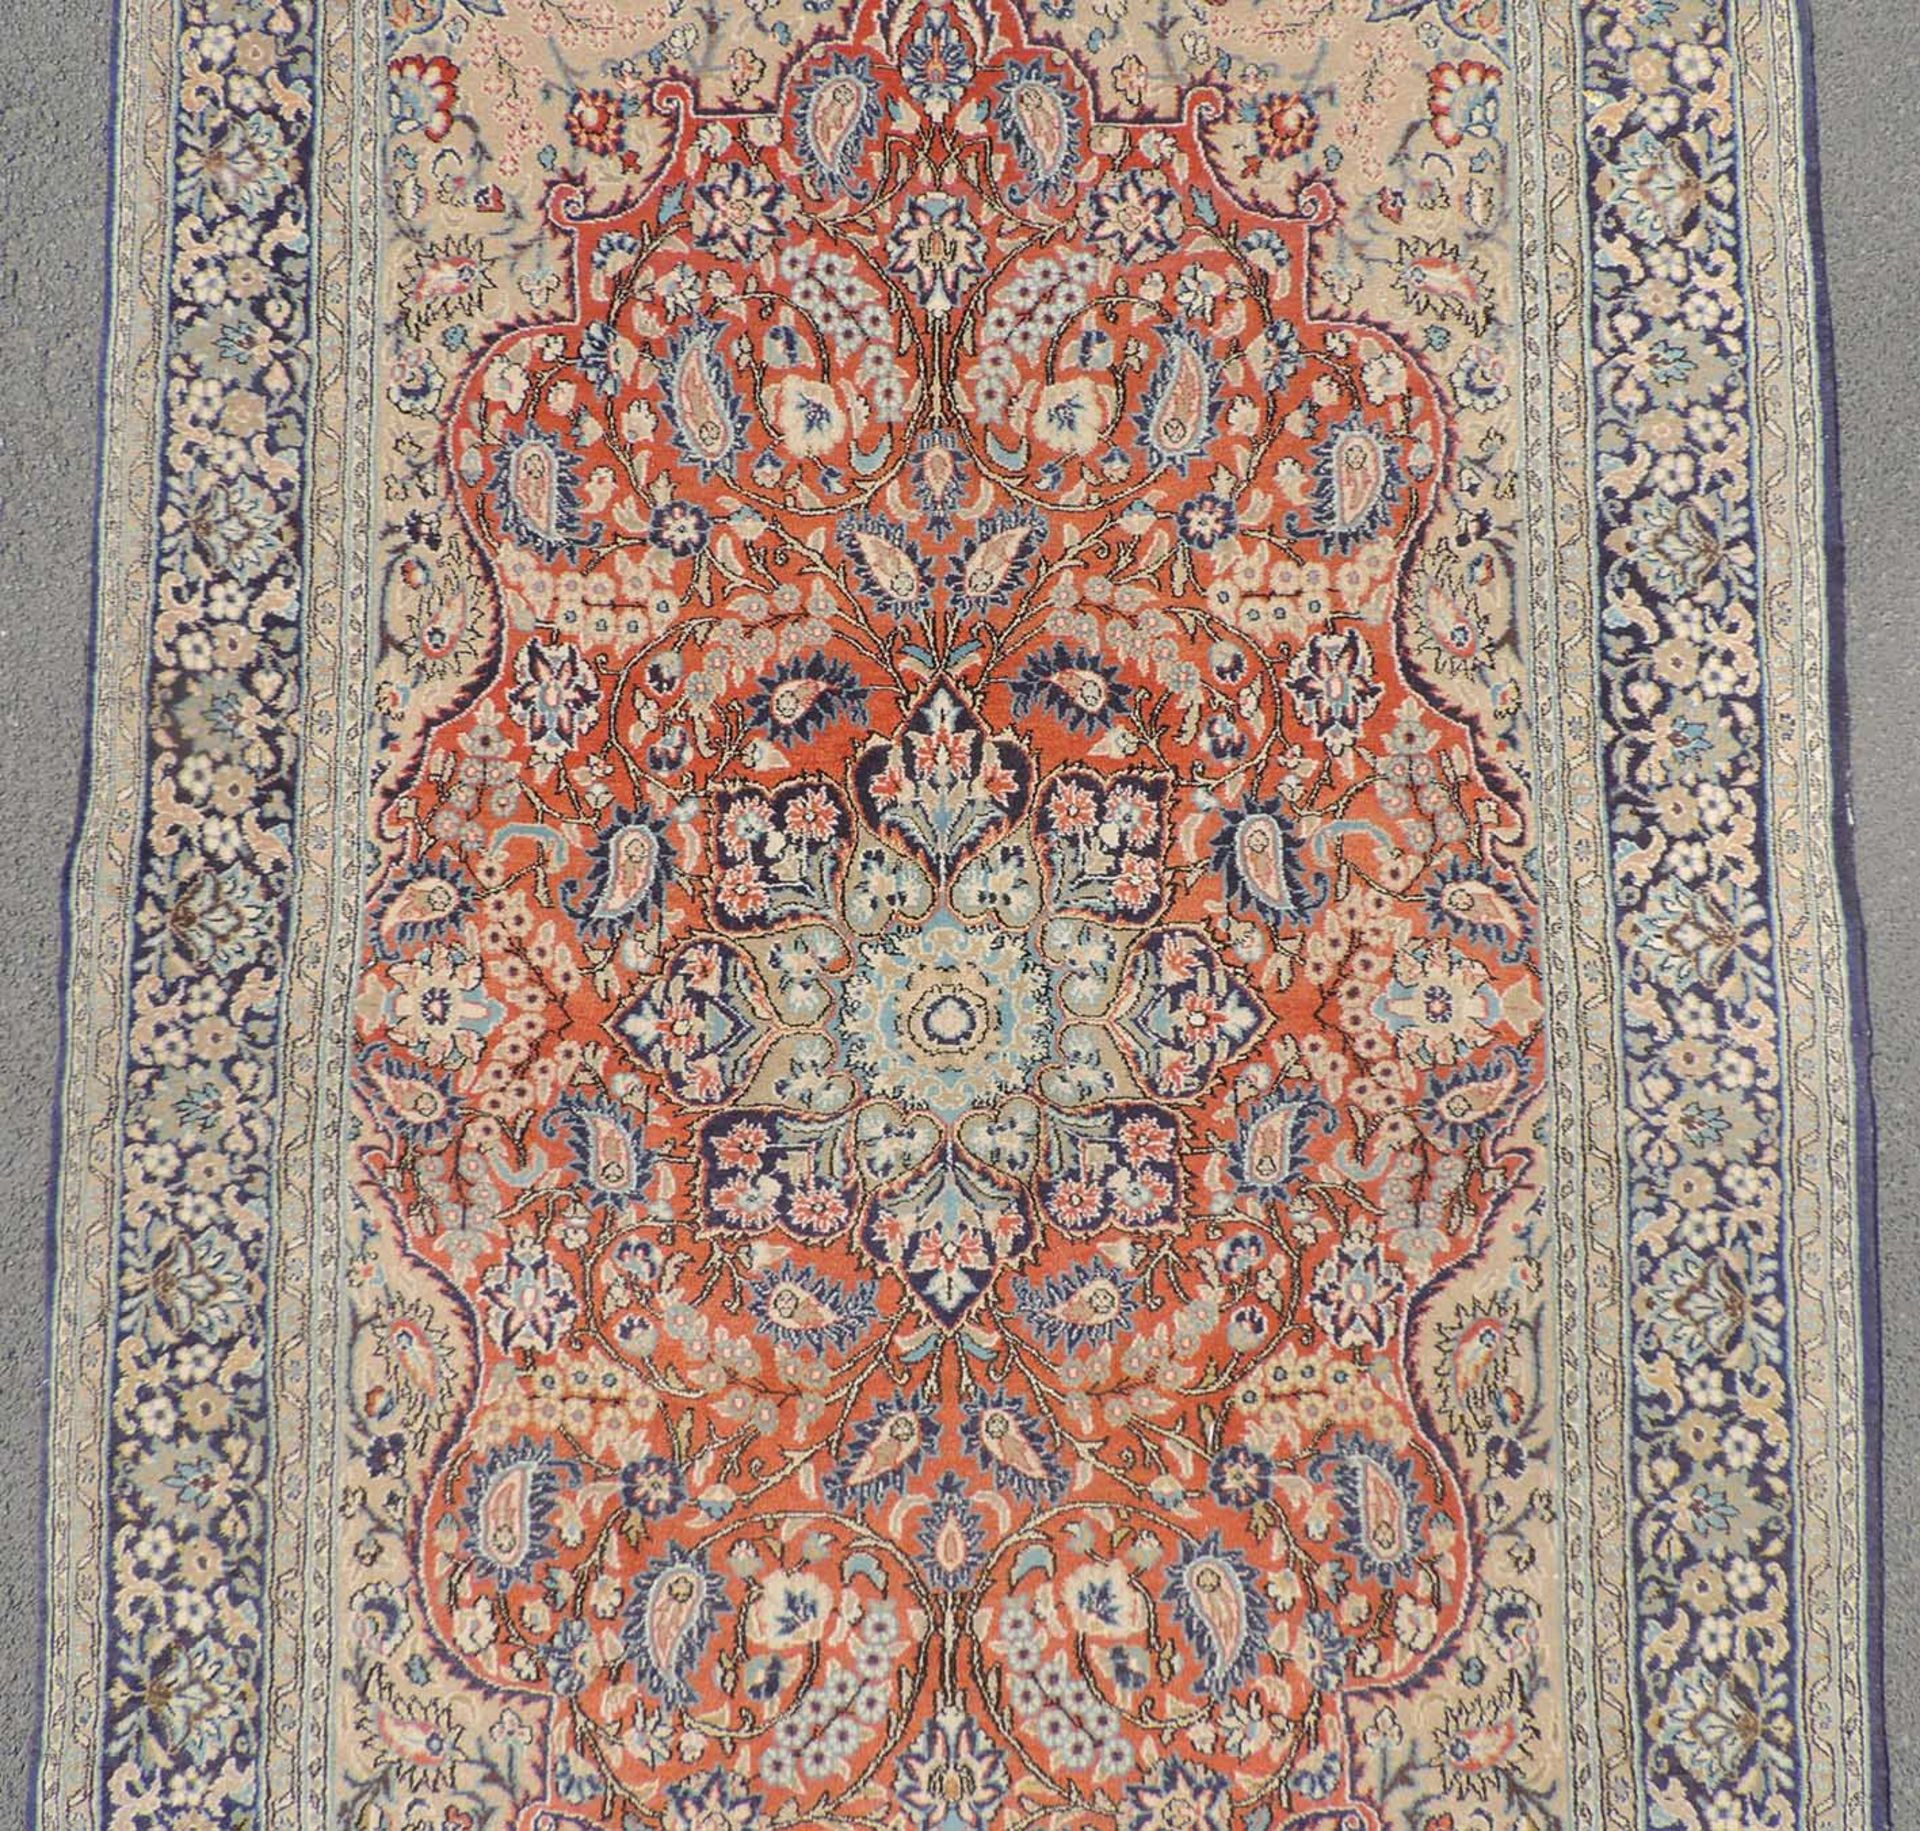 Ghum Persian rug. Iran. Fine weave with silk.230 cm x 140 cm. Knotted by hand. Wool and silk on - Image 3 of 6